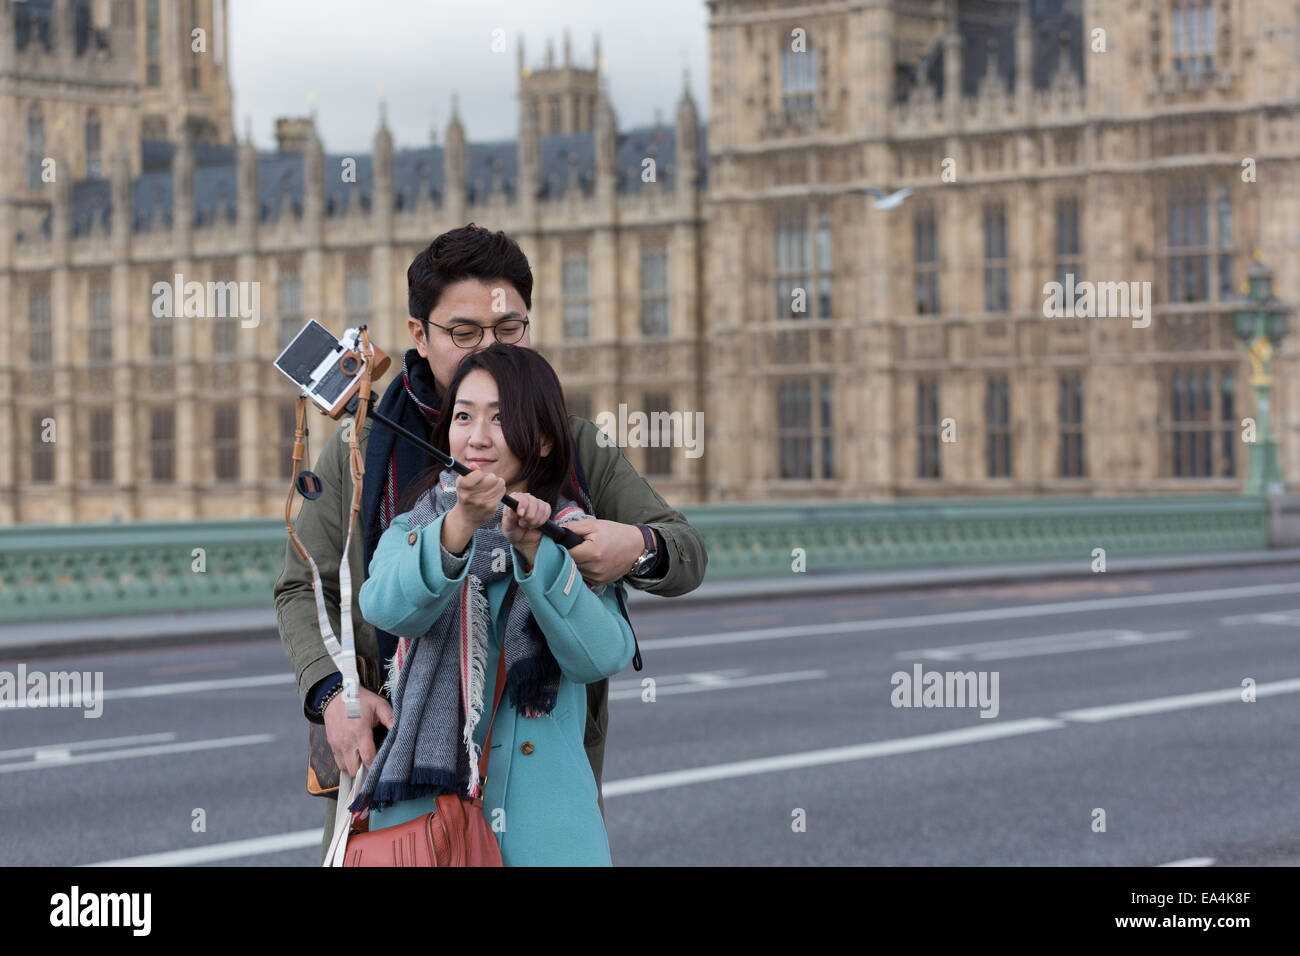 Two Chinese tourists in London capture a selfie photograph using a camera attached to a selfie stick (monopod) Stock Photo